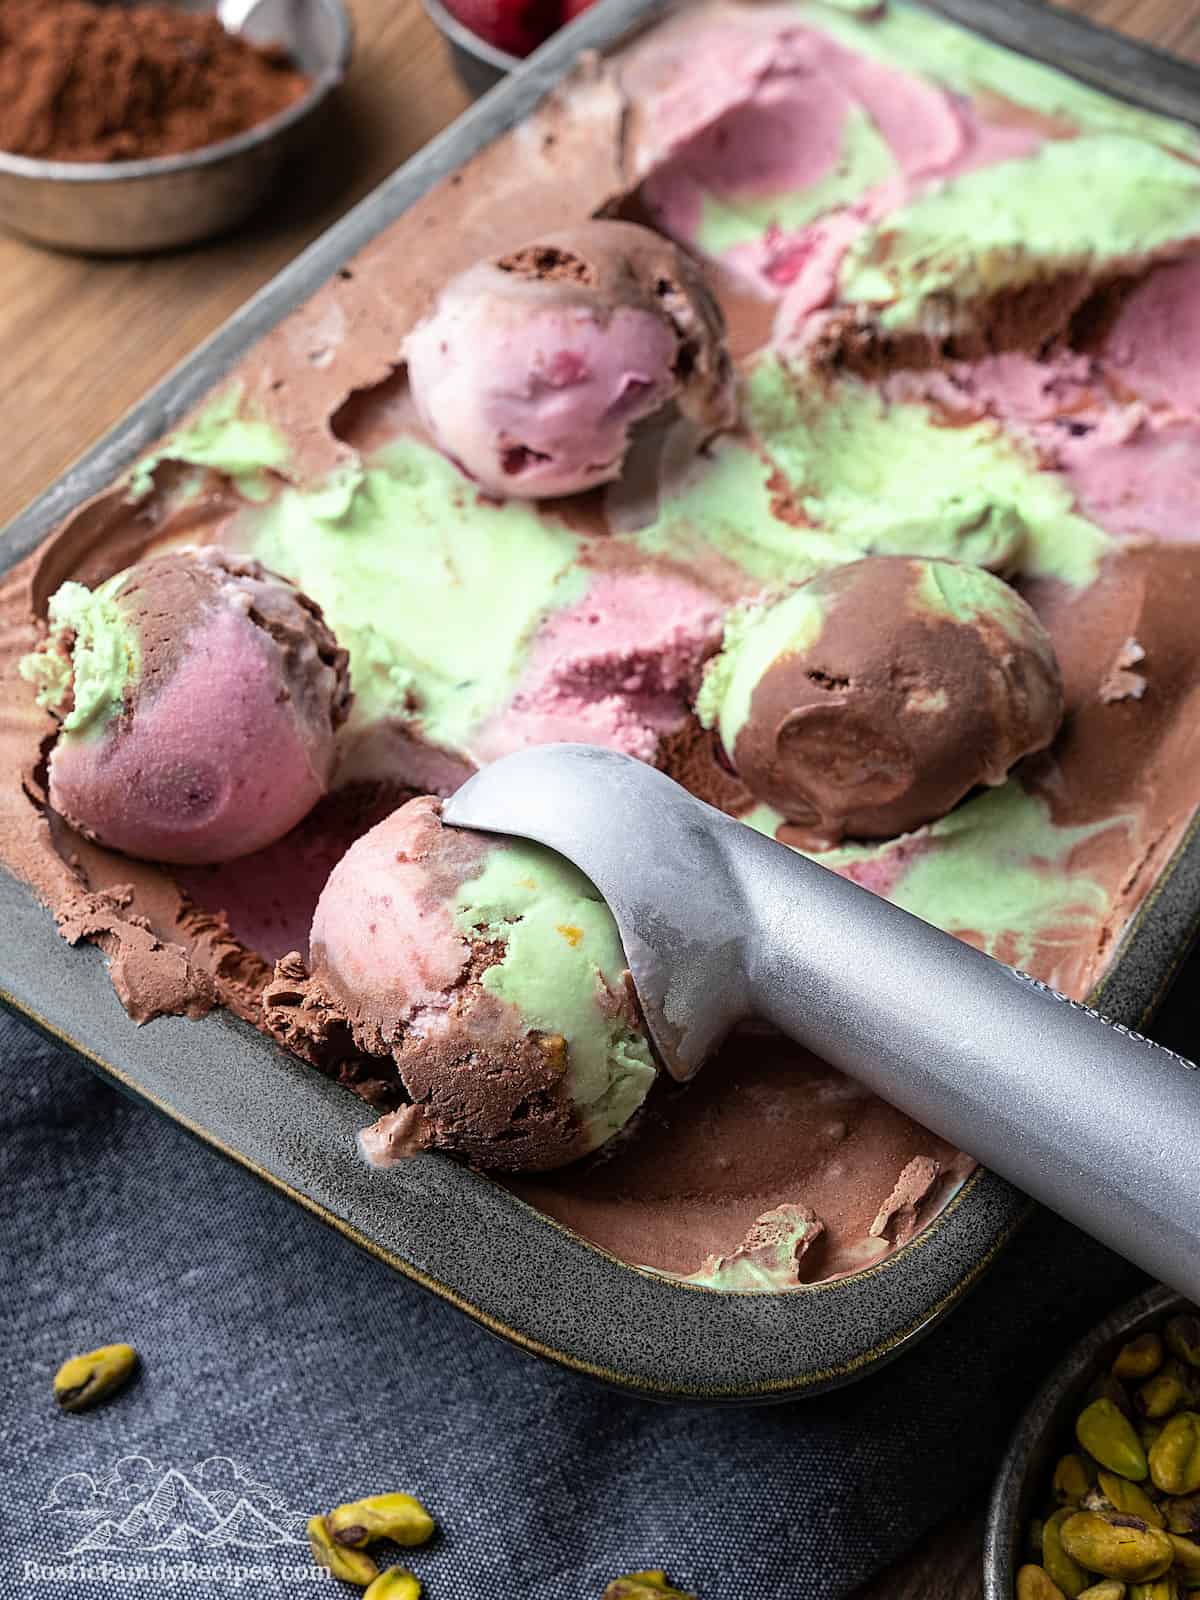 An ice cream scoop scoops a ball of spumoni ice cream from a pan.